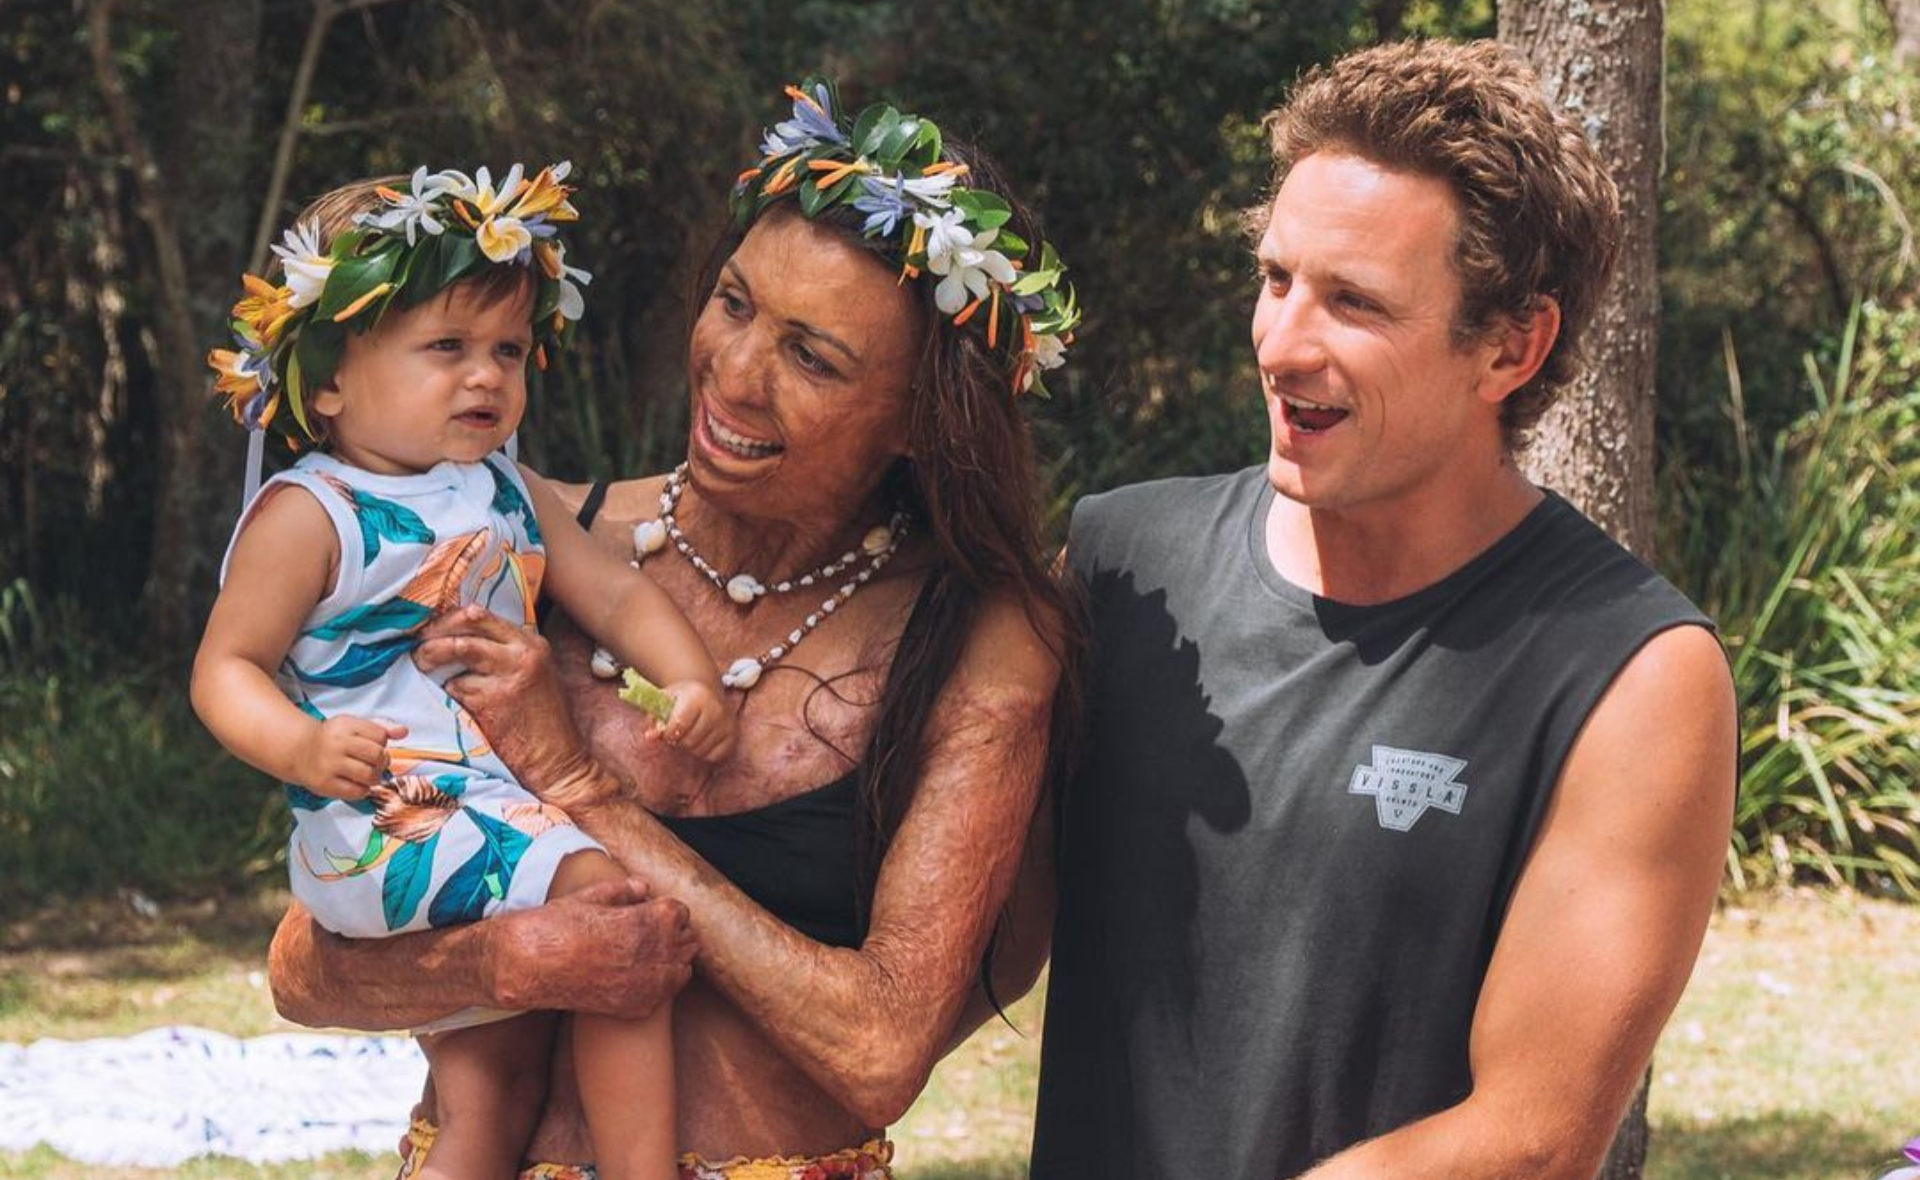 Turia Pitt reveals she’s recovering from a nose reconstruction surgery